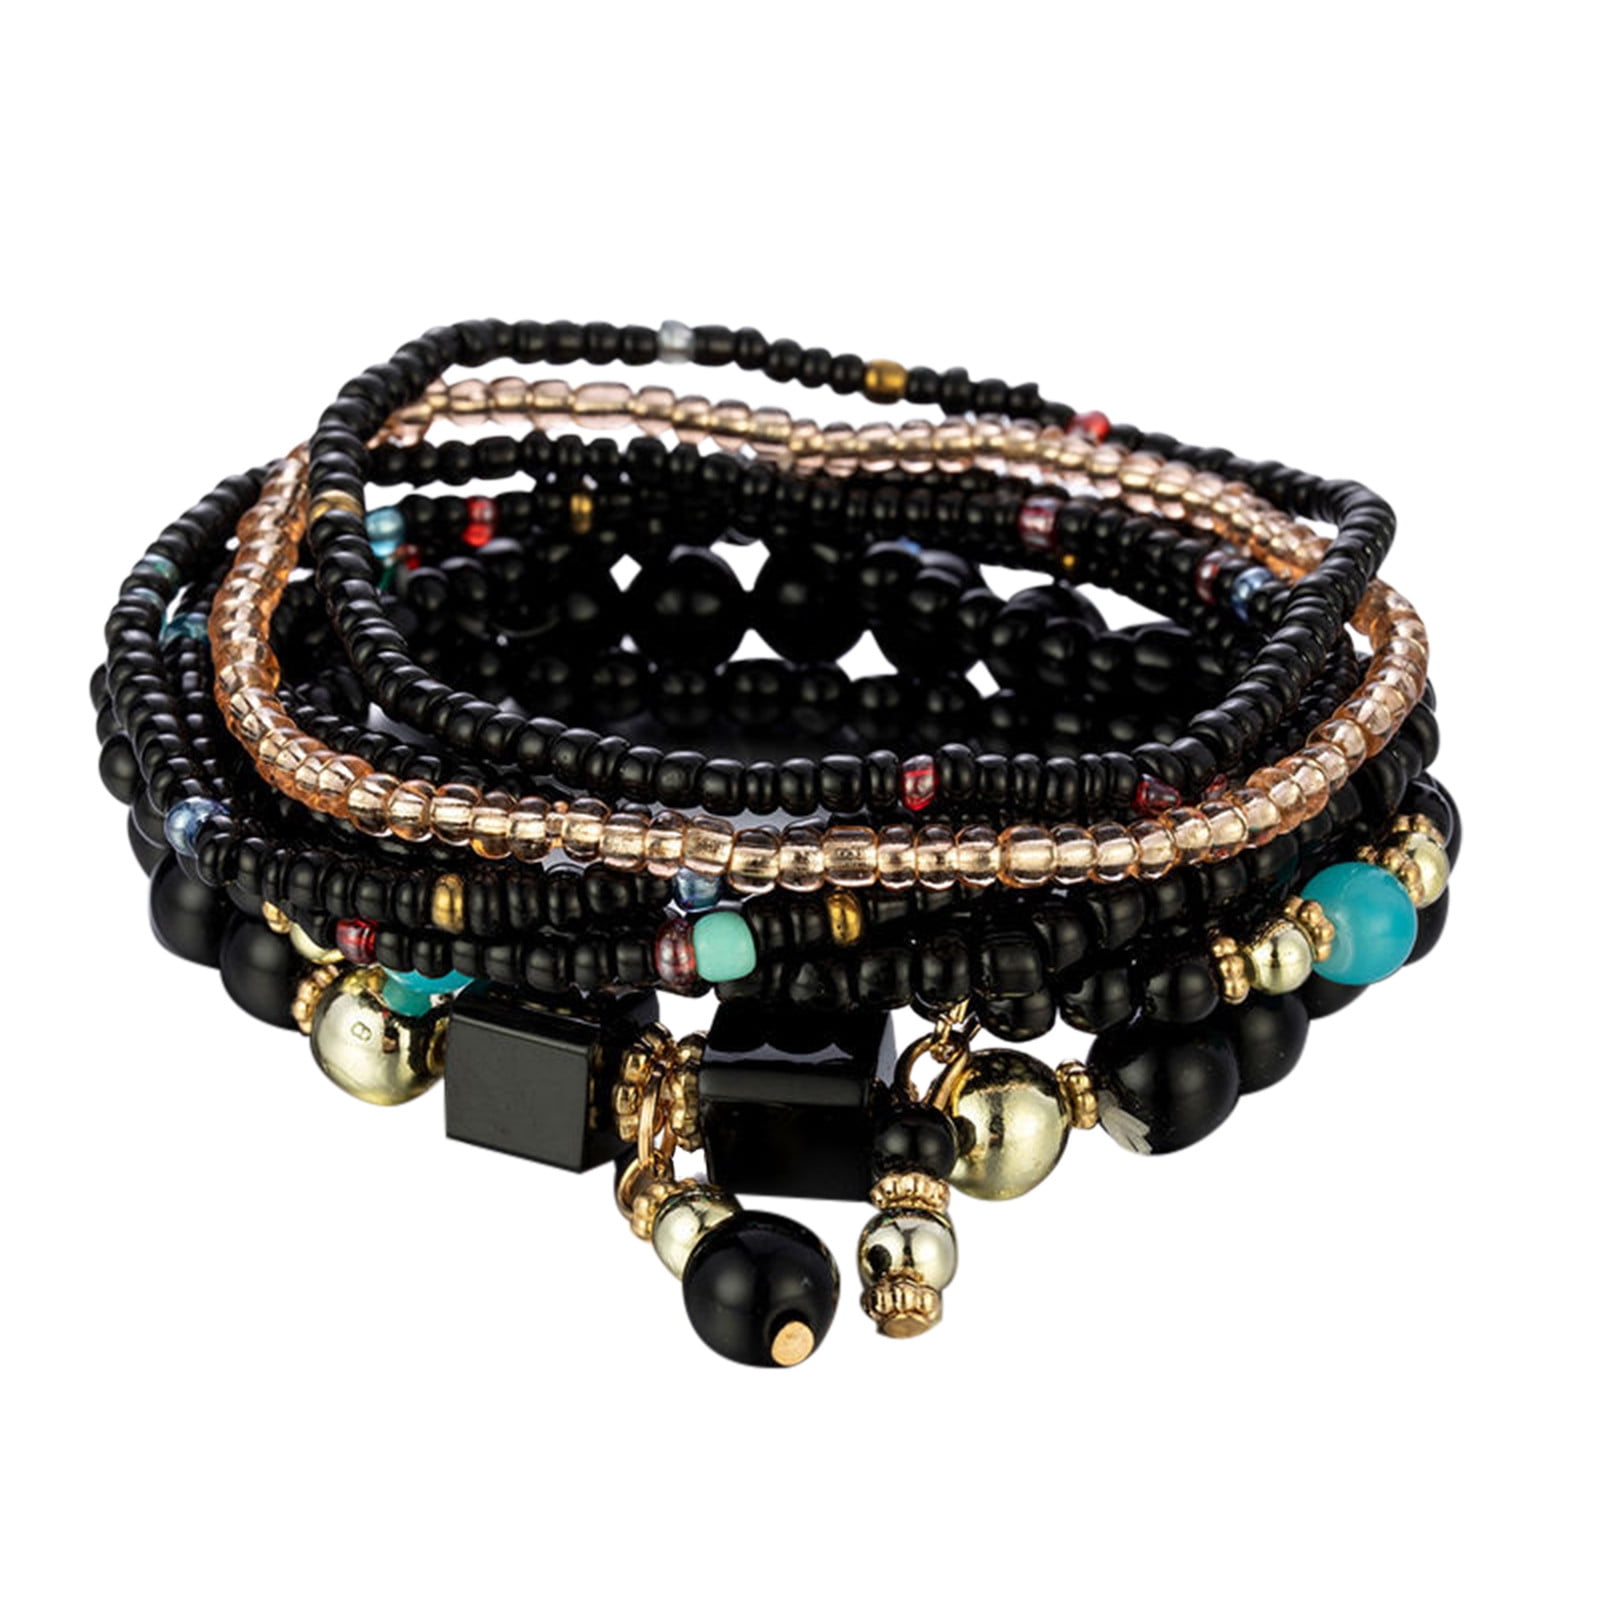 Gemstone Singles Stacking Bracelets on Stretch Cord - Set of 3 or 3 Wrap